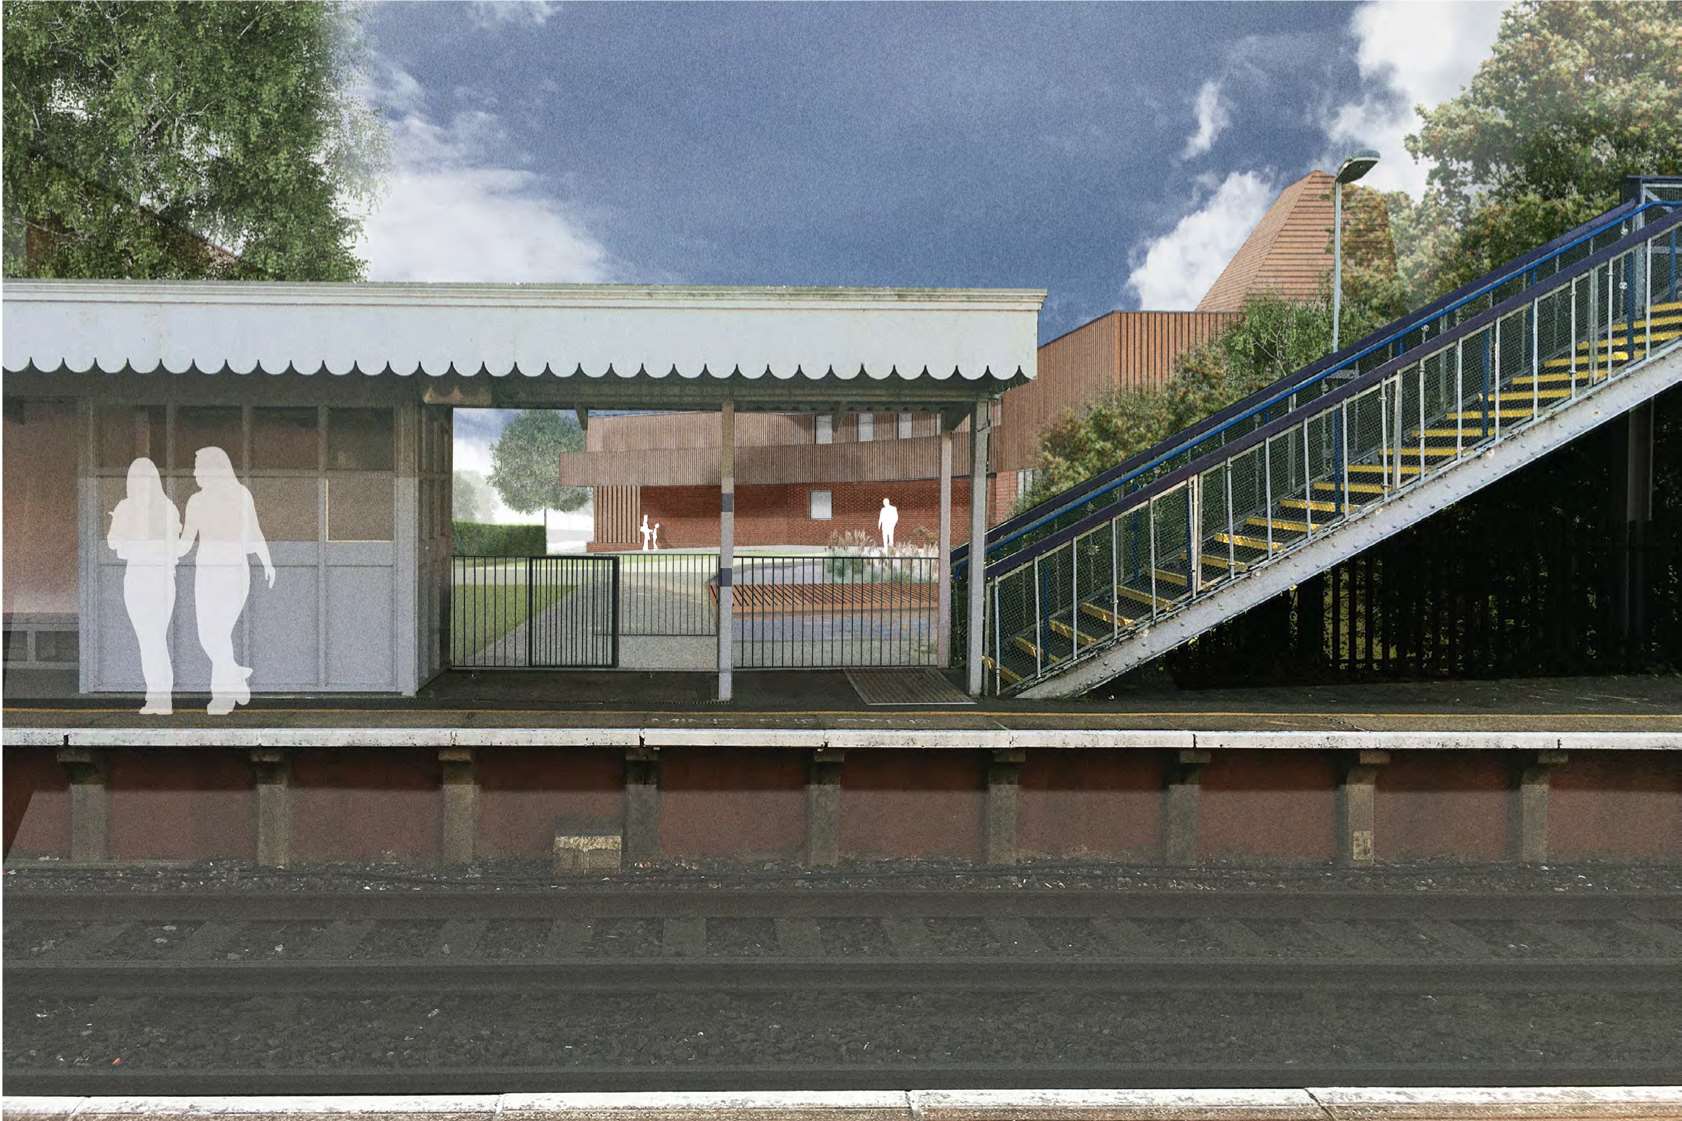 An artist's impression of the station